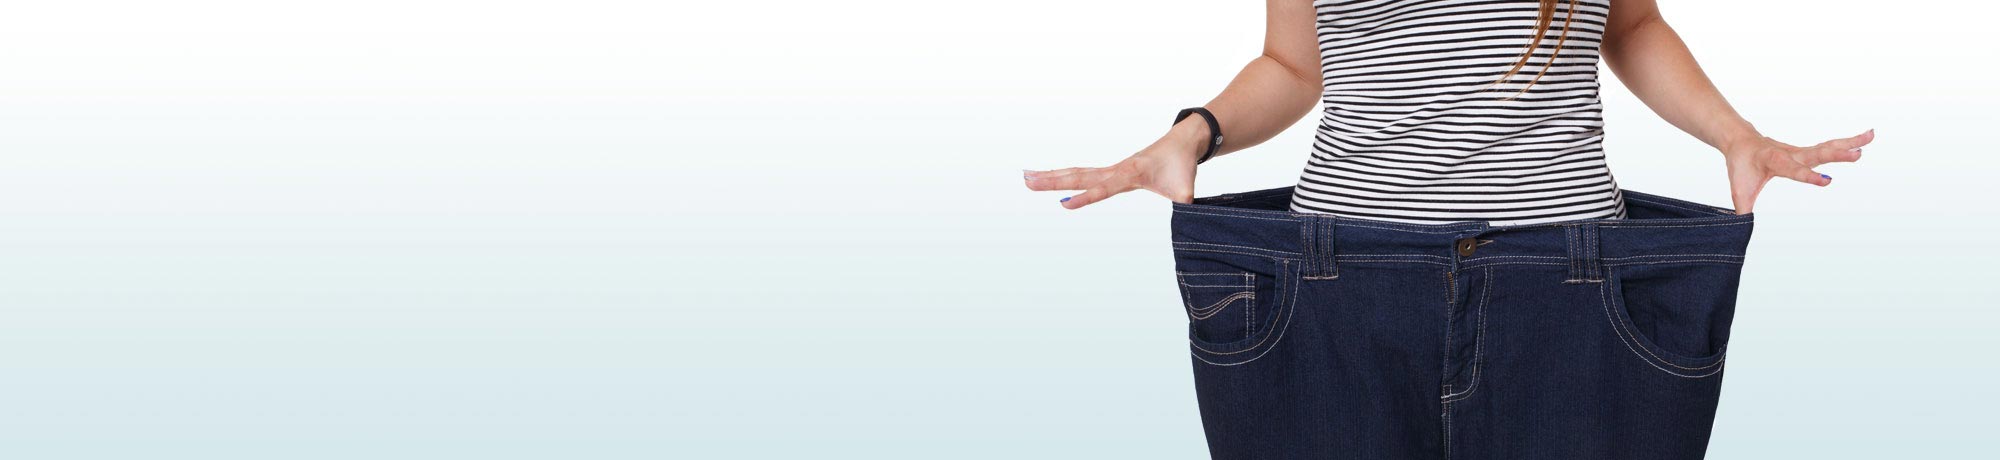 Weight Loss | Treatments, Solutions & Surgery Options | Spire Healthcare